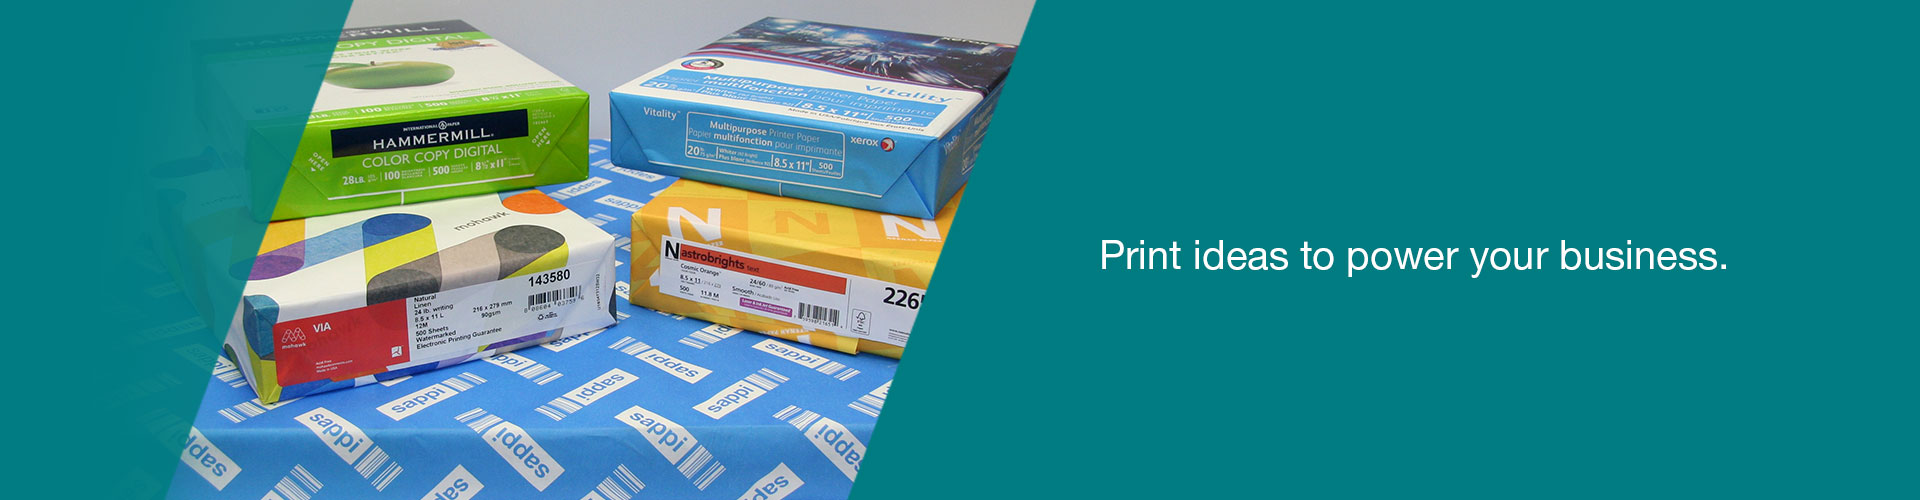 1920x500 Interior Fine Printing papers